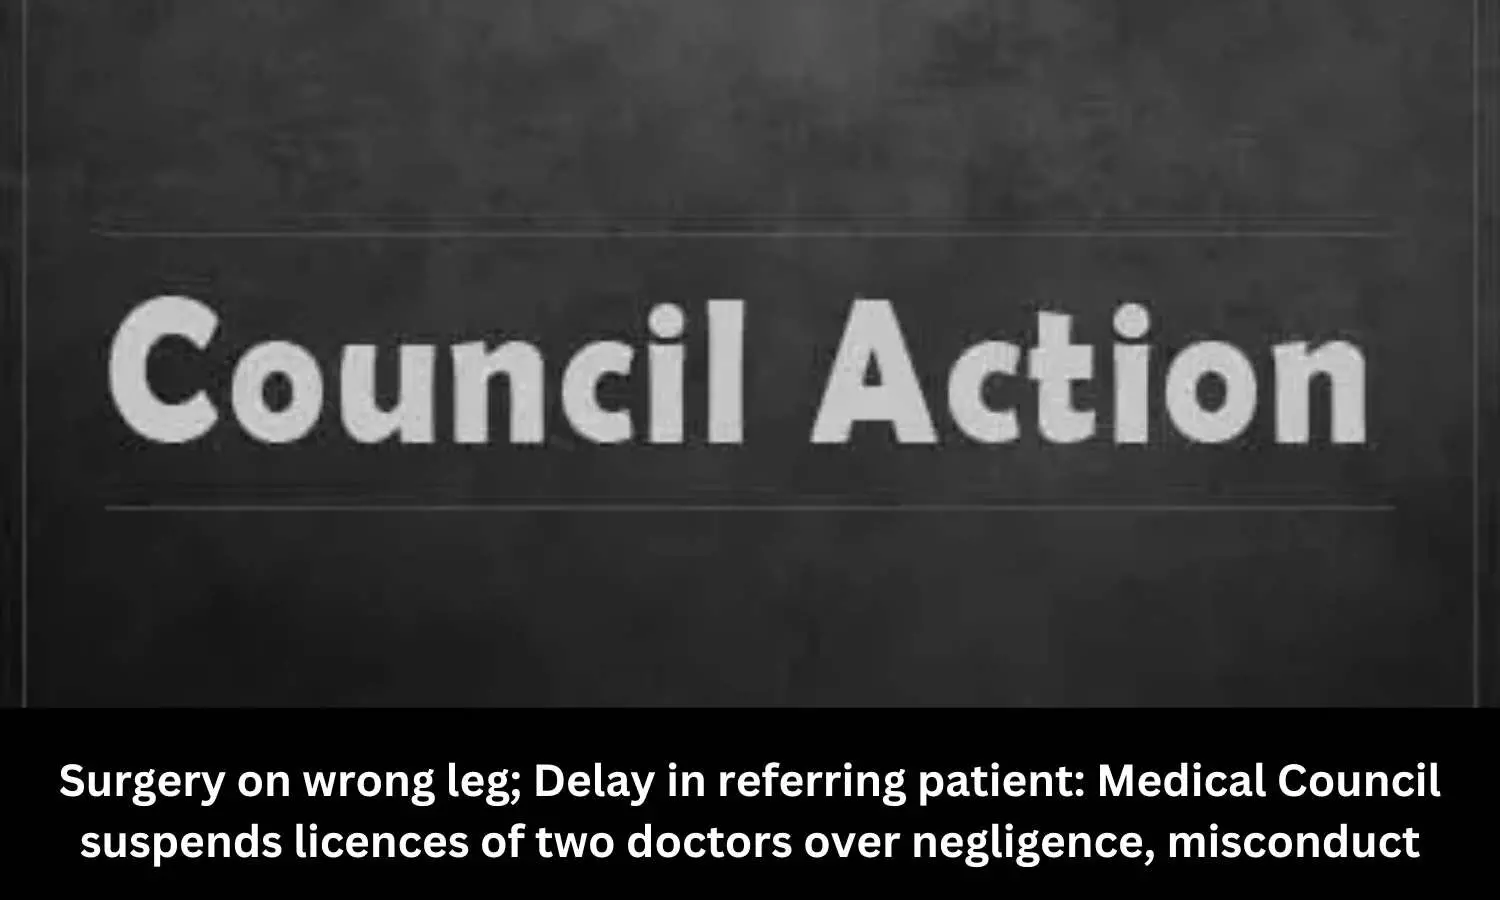 Medical Council suspends licences of two doctors over negligence, misconduct